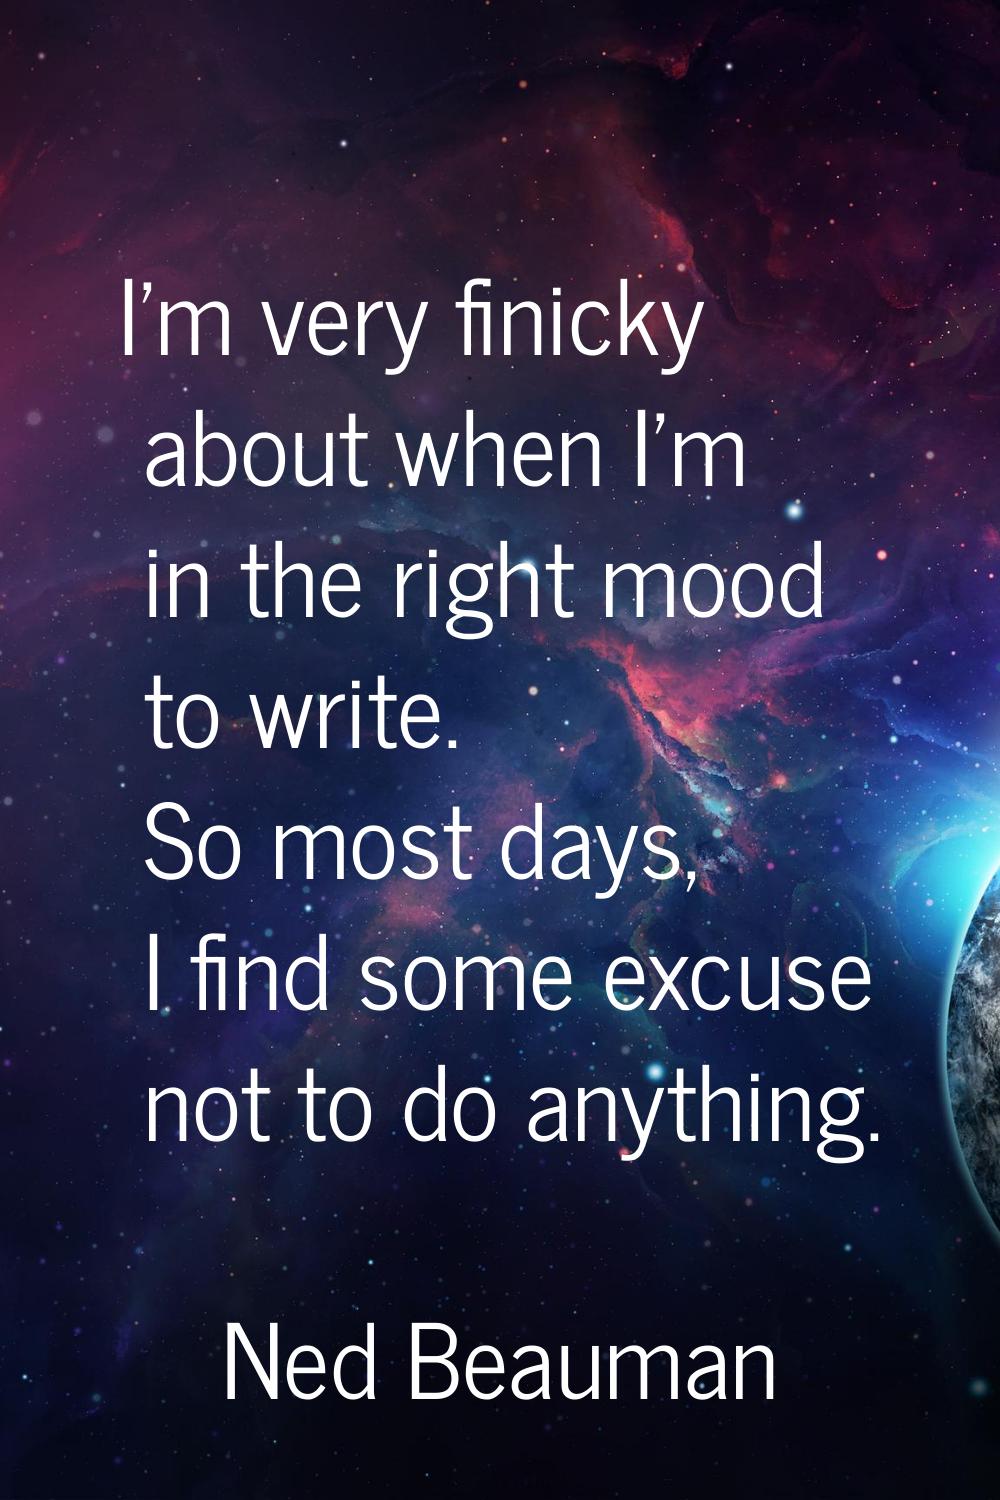 I'm very finicky about when I'm in the right mood to write. So most days, I find some excuse not to